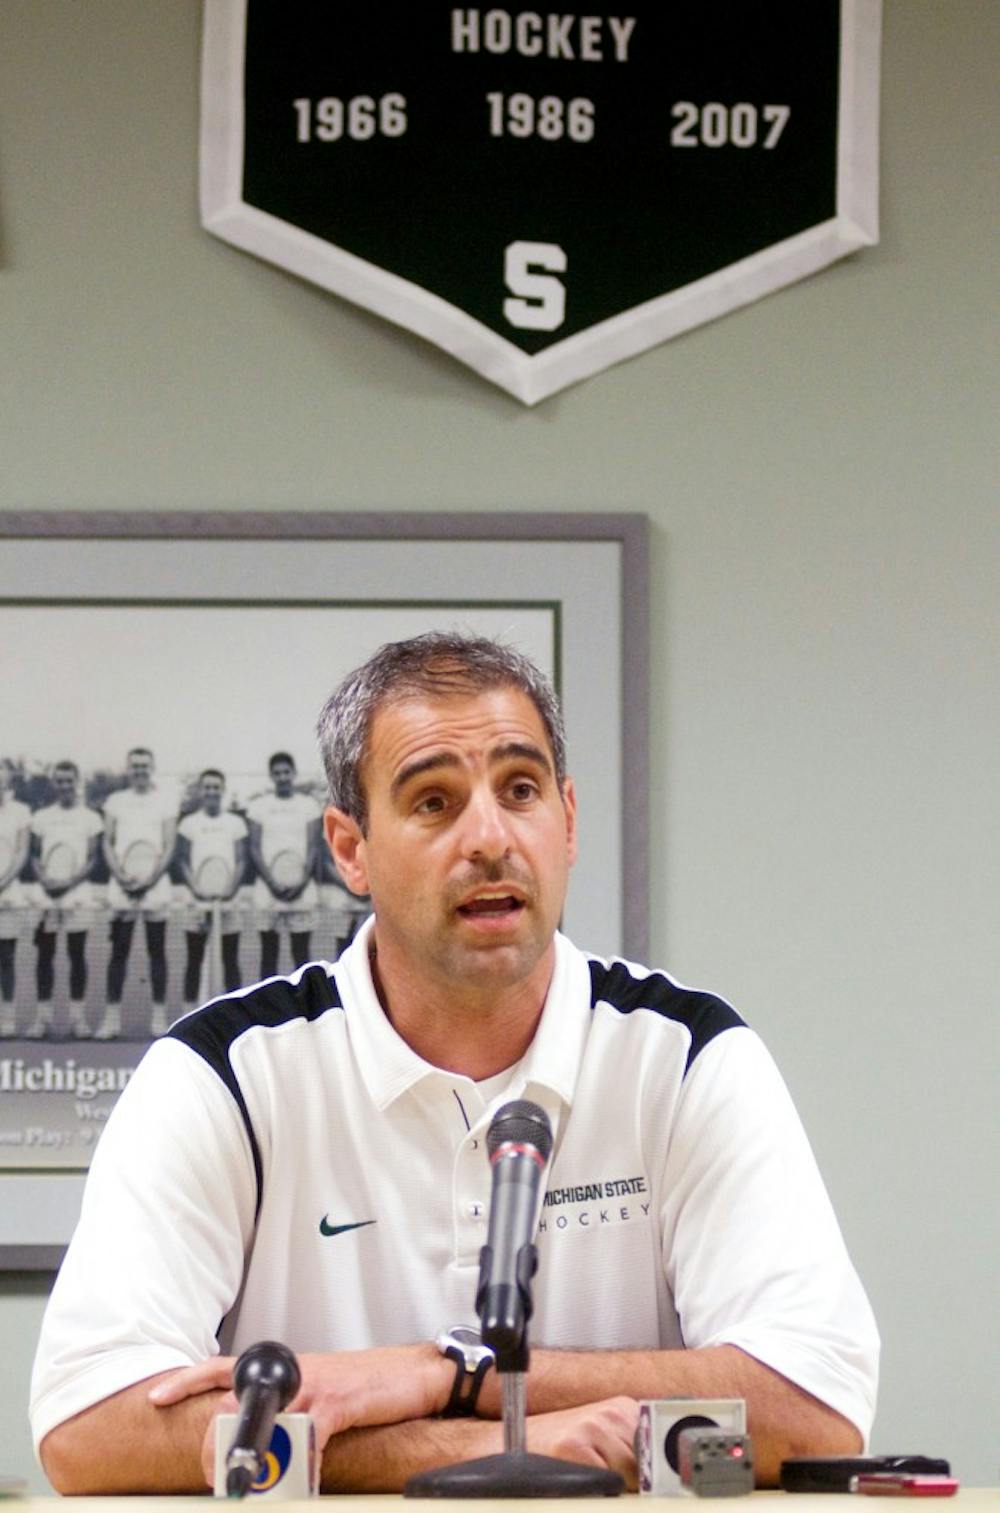 	<p><span class="caps">MSU</span> hockey head coach Tom Anastos answers questions during a media meet and greet held to introduce an all-new coaching staff Tuesday at Spartan Stadium. Anastos, along with assistant coaches Kelly Miller and Tom Newton, will lead the Spartans into the 2011-12 season. </p>